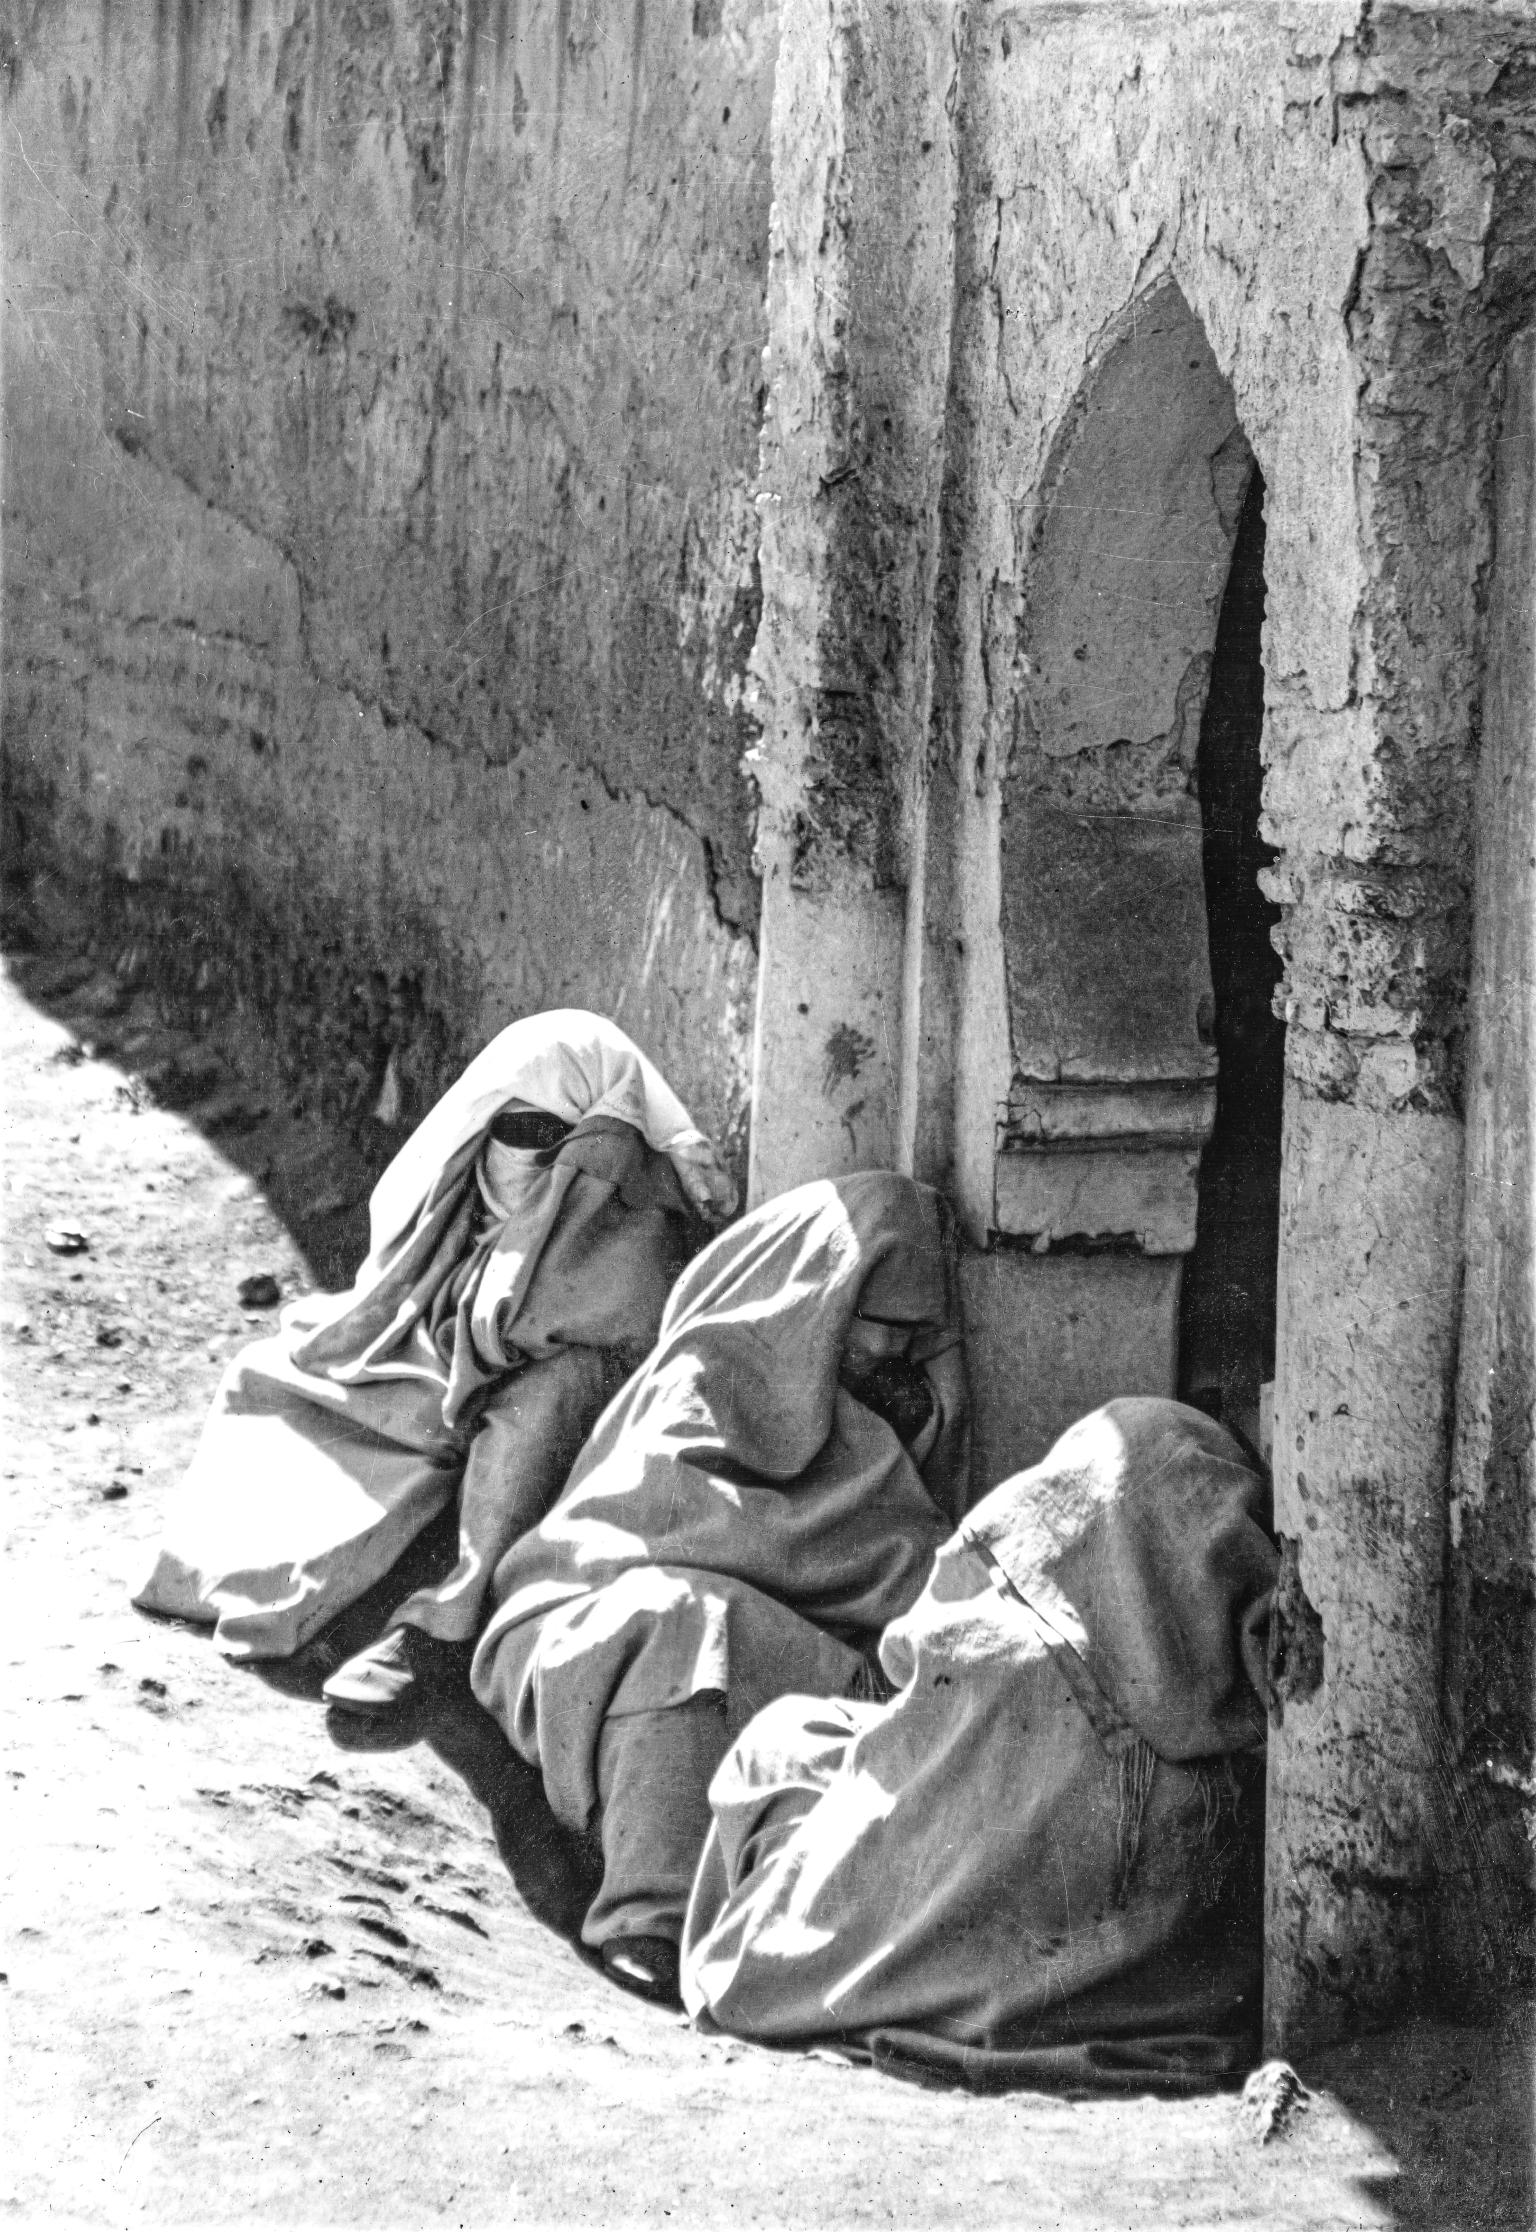 Photograph of three women seated on the floor next to building wearing hooded robes and veils and angled away from the viewer.